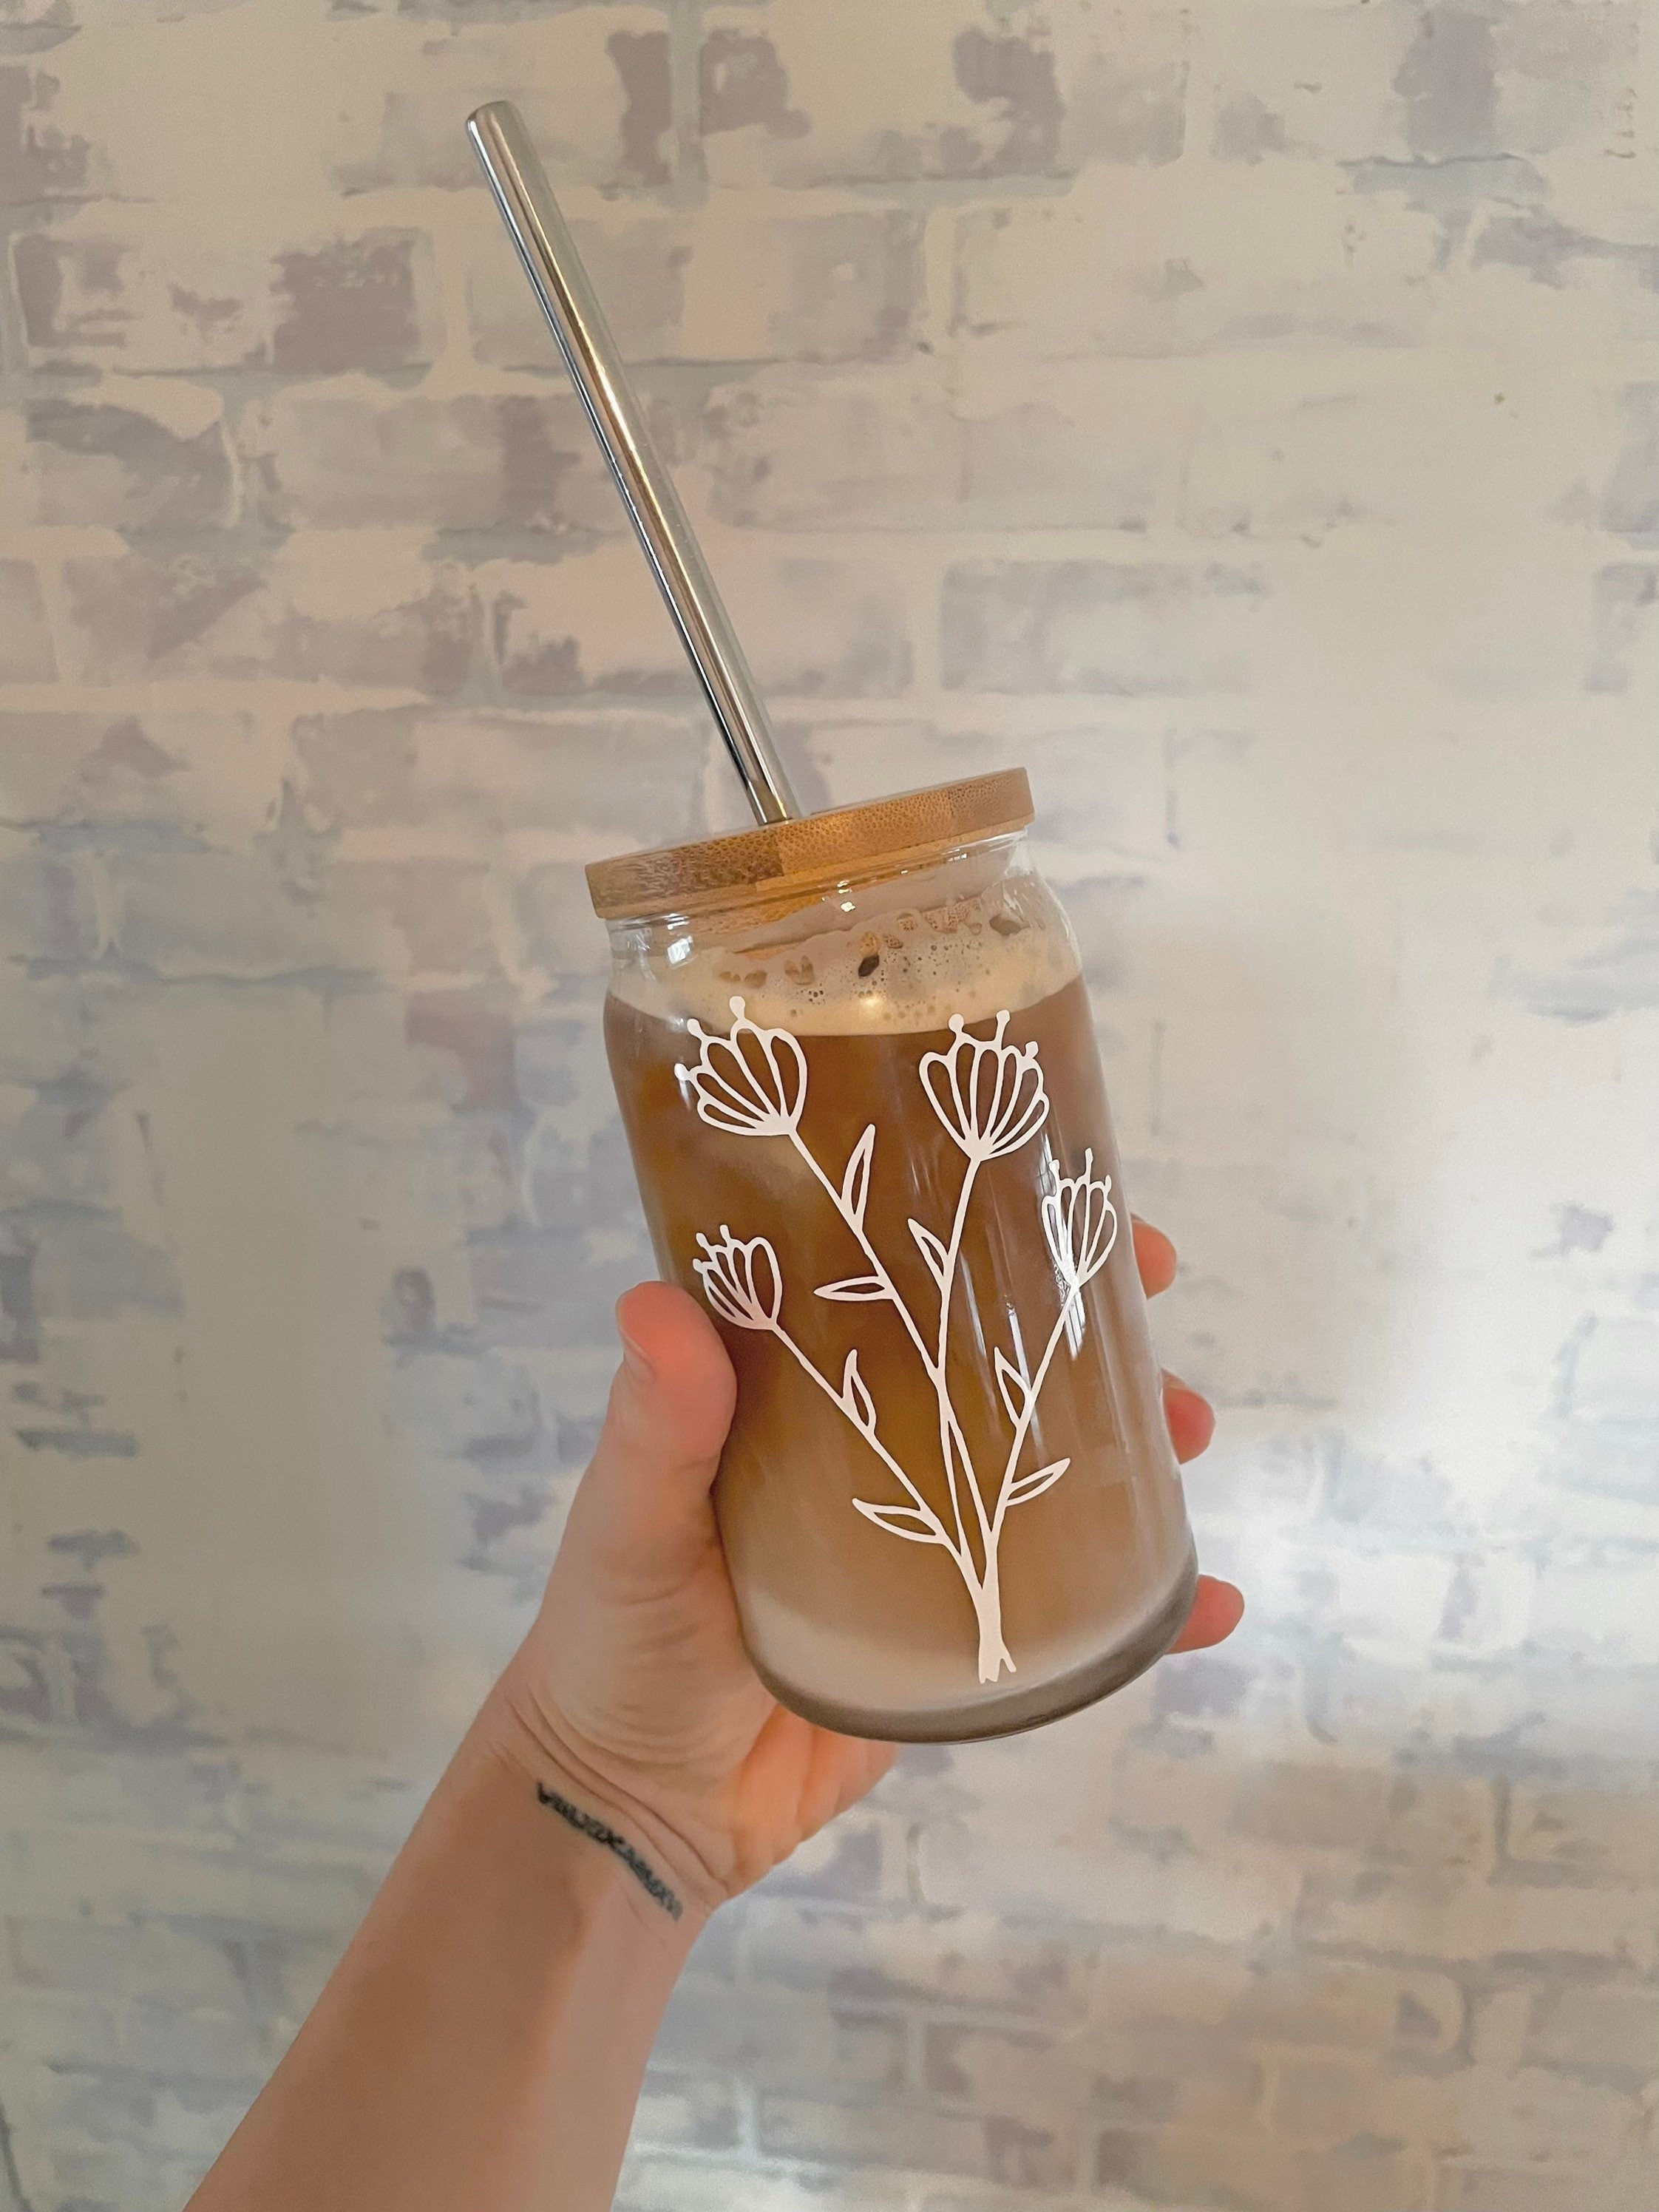 I'm loving these glass beer can cups for my morning iced coffee